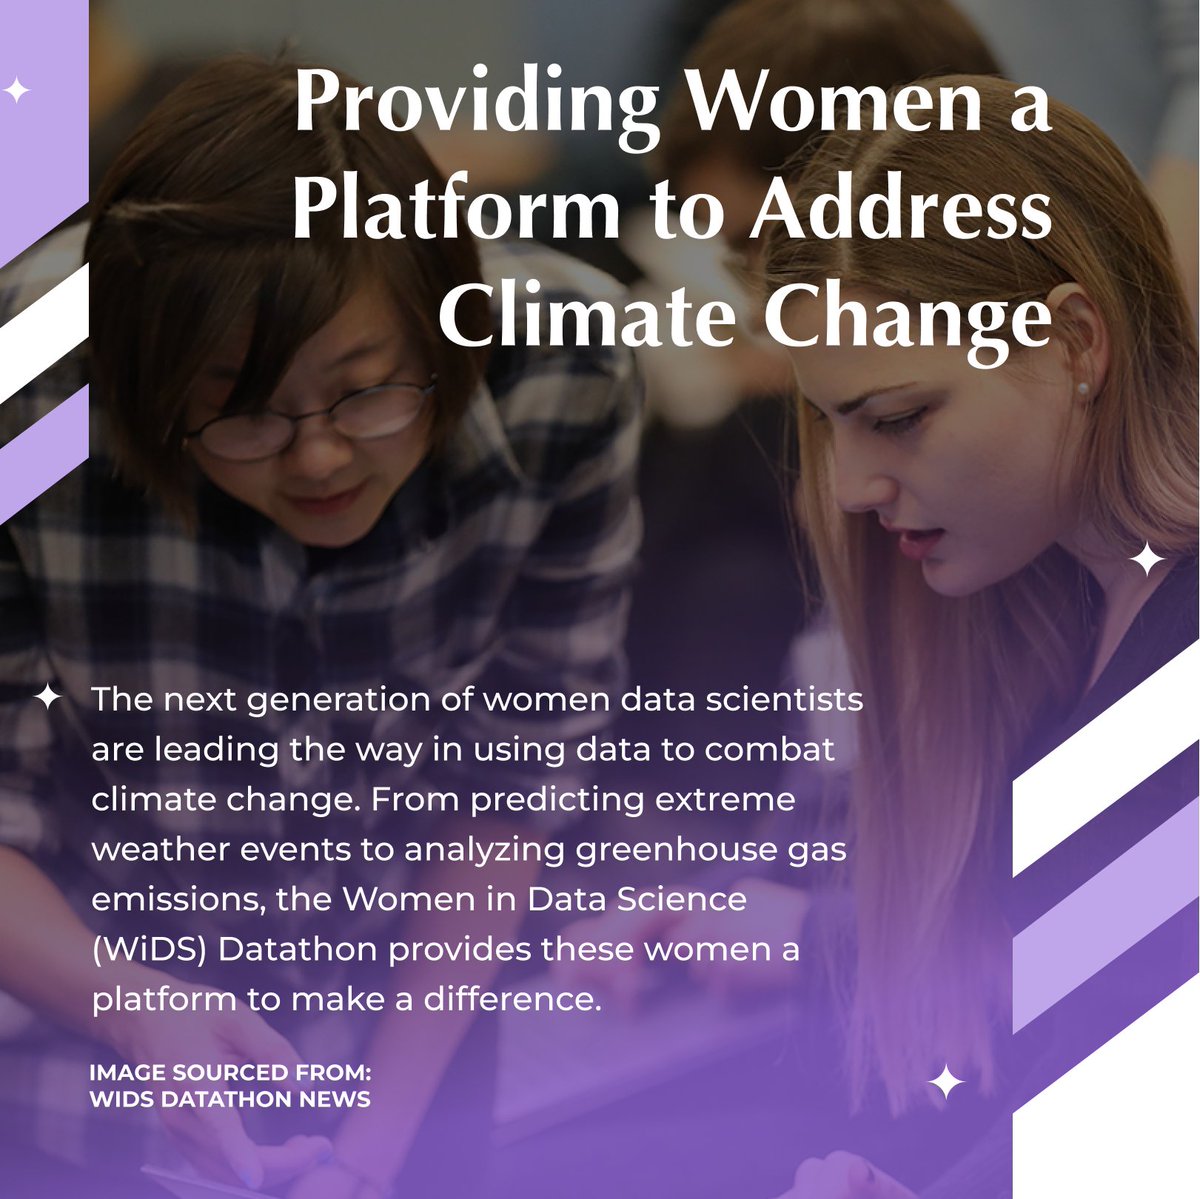 The @WiDS_Worldwide Datathon is just one example of how women can be empowered by data and technology to create innovative solutions for a more sustainable future. Read more here: fortune.com/2022/07/22/new…  
#IWD2023 #WiDSDatathon #datascience #women #representation